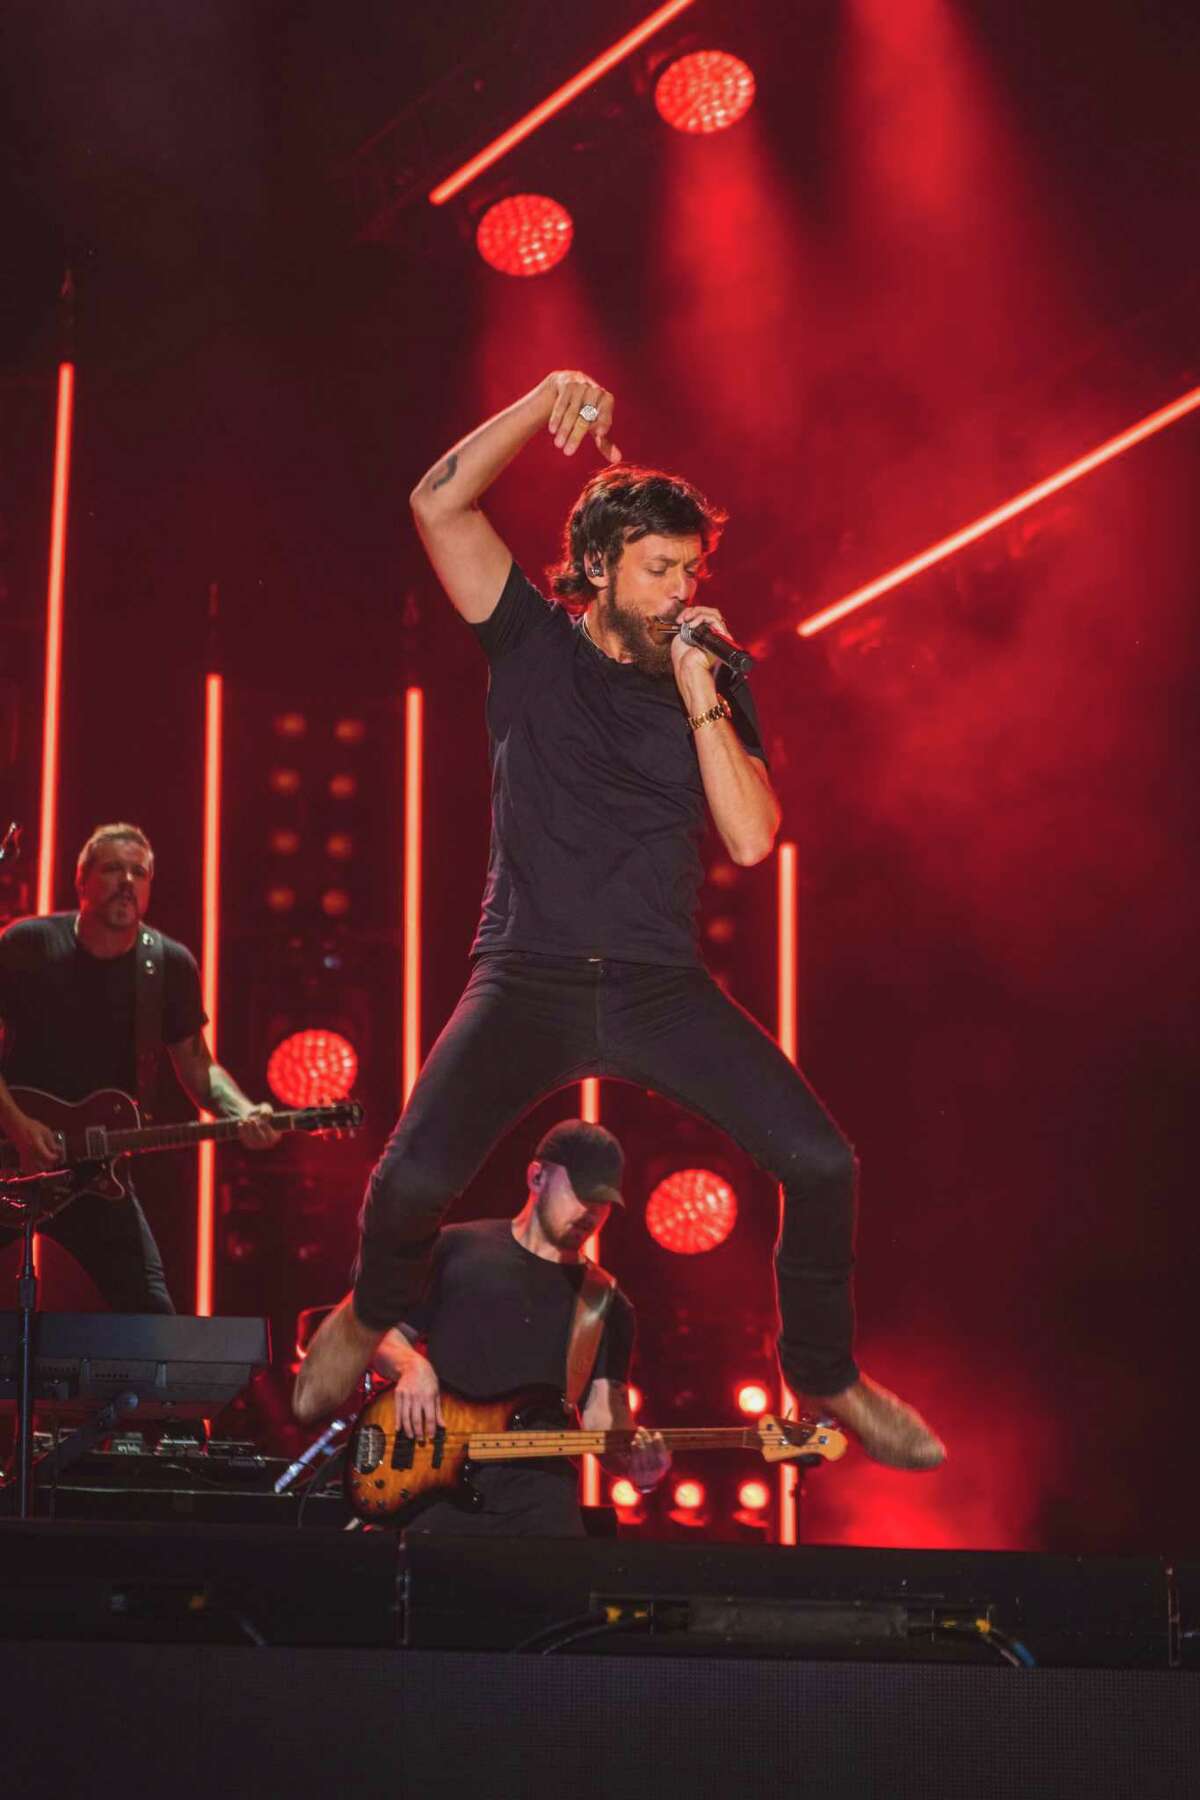 Country star Chris Janson performs at The Palace Theatre in Stamford on Friday at 8 p.m. Shane Profitt will open the show, followed by Ray Fulcher and then Janson.